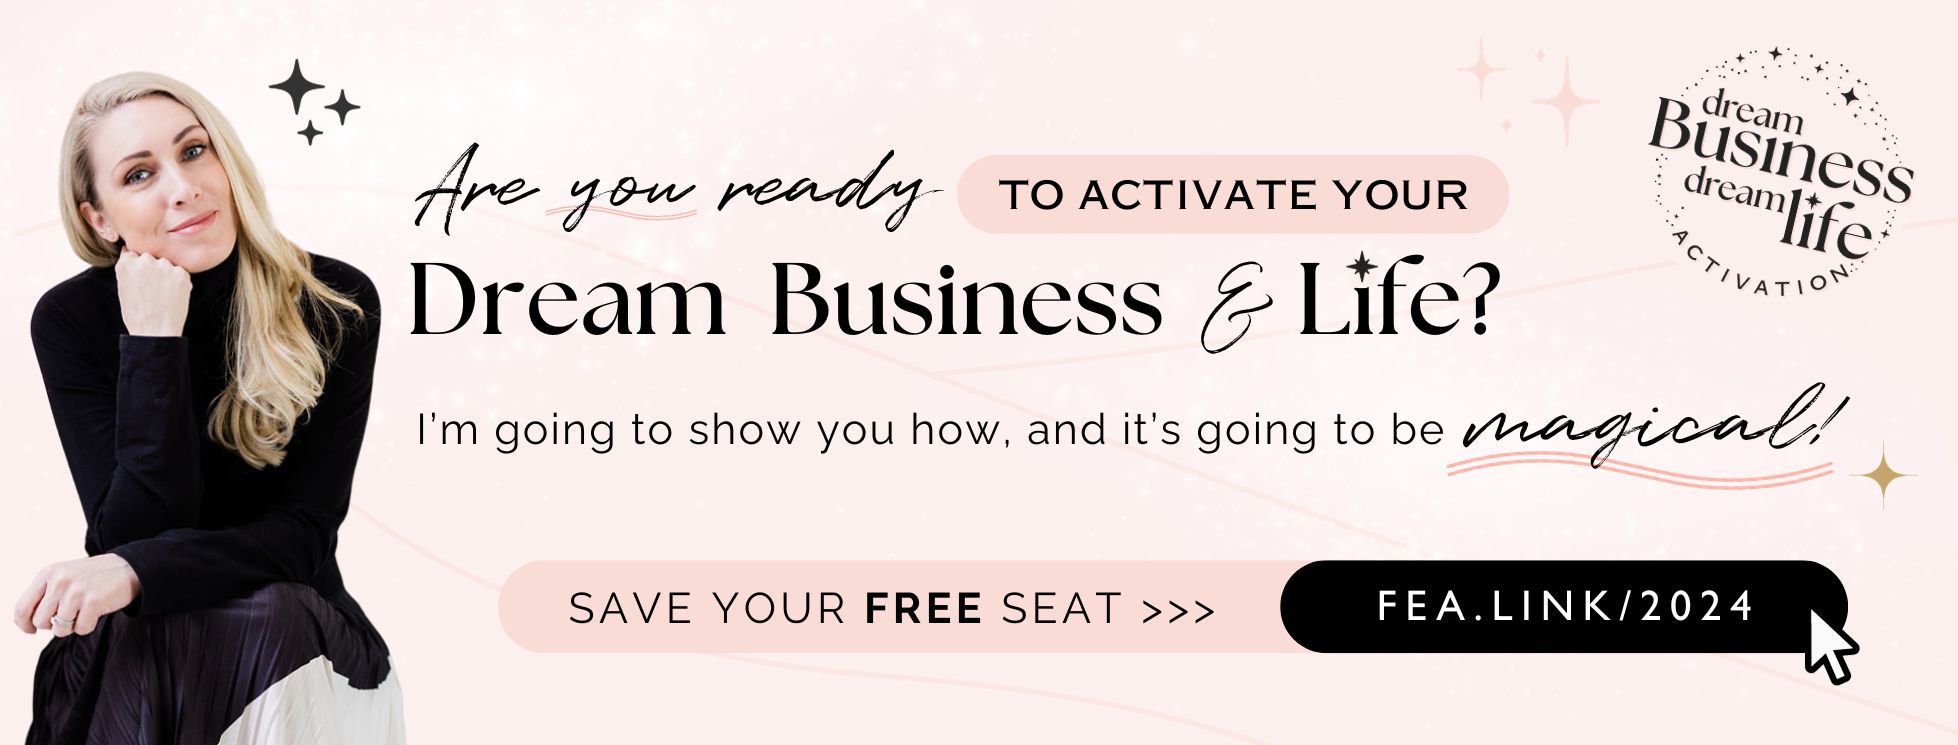 Join the Dream Business, Dream Life Activation with Carrie Green